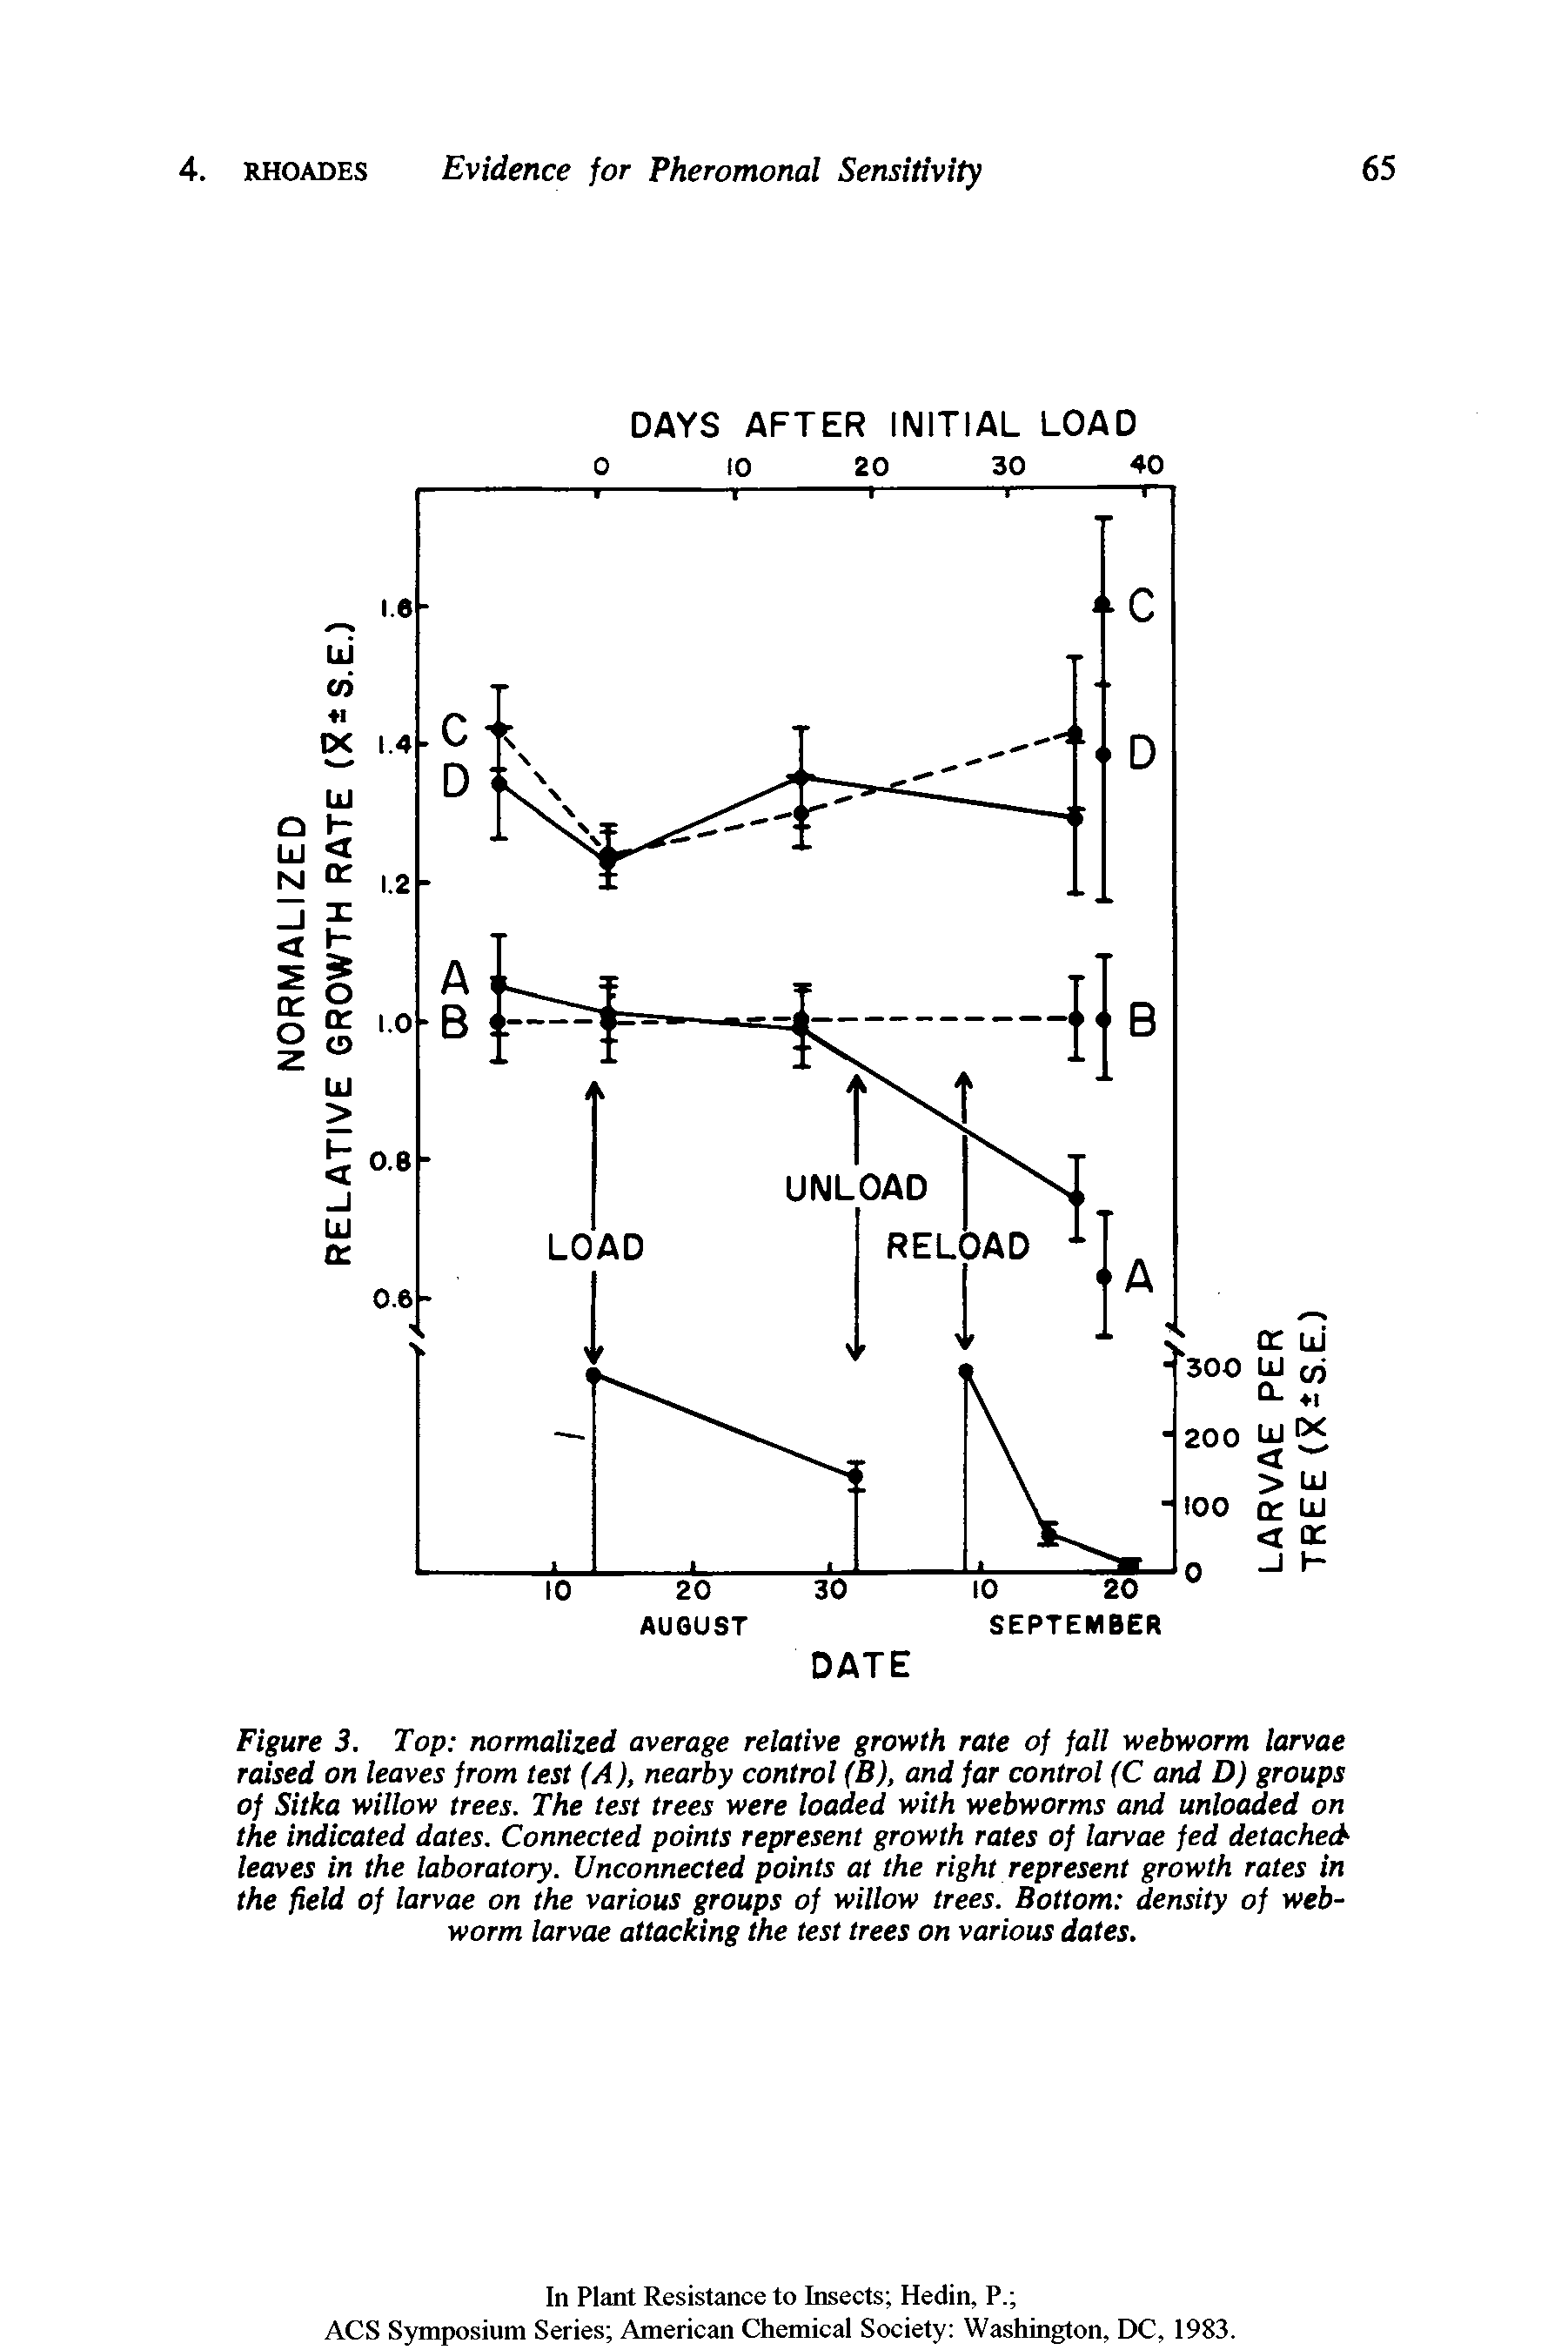 Figure 3. Top normalized average relative growth rate of fall webworm larvae raised on leaves from test (A), nearby control (B), and far control (C and D) groups of Sitka willow trees. The test trees were loaded with webworms and unloaded on the indicated dates. Connected points represent growth rates of larvae fed detached-leaves in the laboratory. Unconnected points at the right represent growth rates in the field of larvae on the various groups of willow trees. Bottom density of webworm larvae attacking the test trees on various dates.